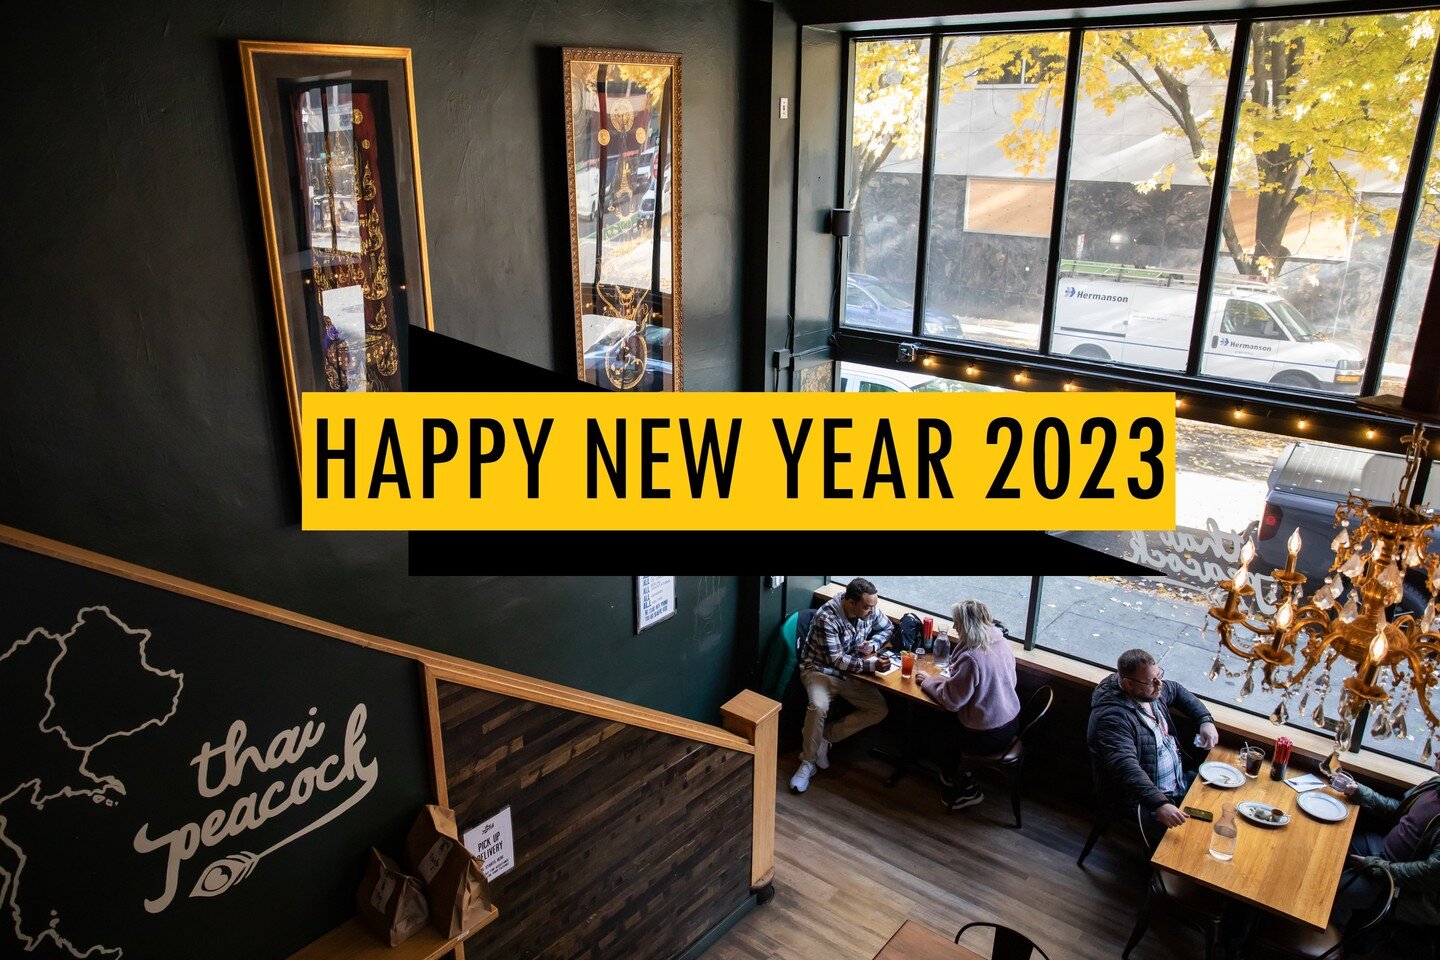 HAPPY NEW YEAR 🎆🎇 We' d like to thank you all for your amazing support. To health and joy to you all 🧡💛

TO-GO / Delivery / Dinning
11A &ndash; Close

Web: www.thaipeacockpdx.com

#thaipeacock #thaipeacockpdx #pdxdining #eeeeeats #portlandfood #t